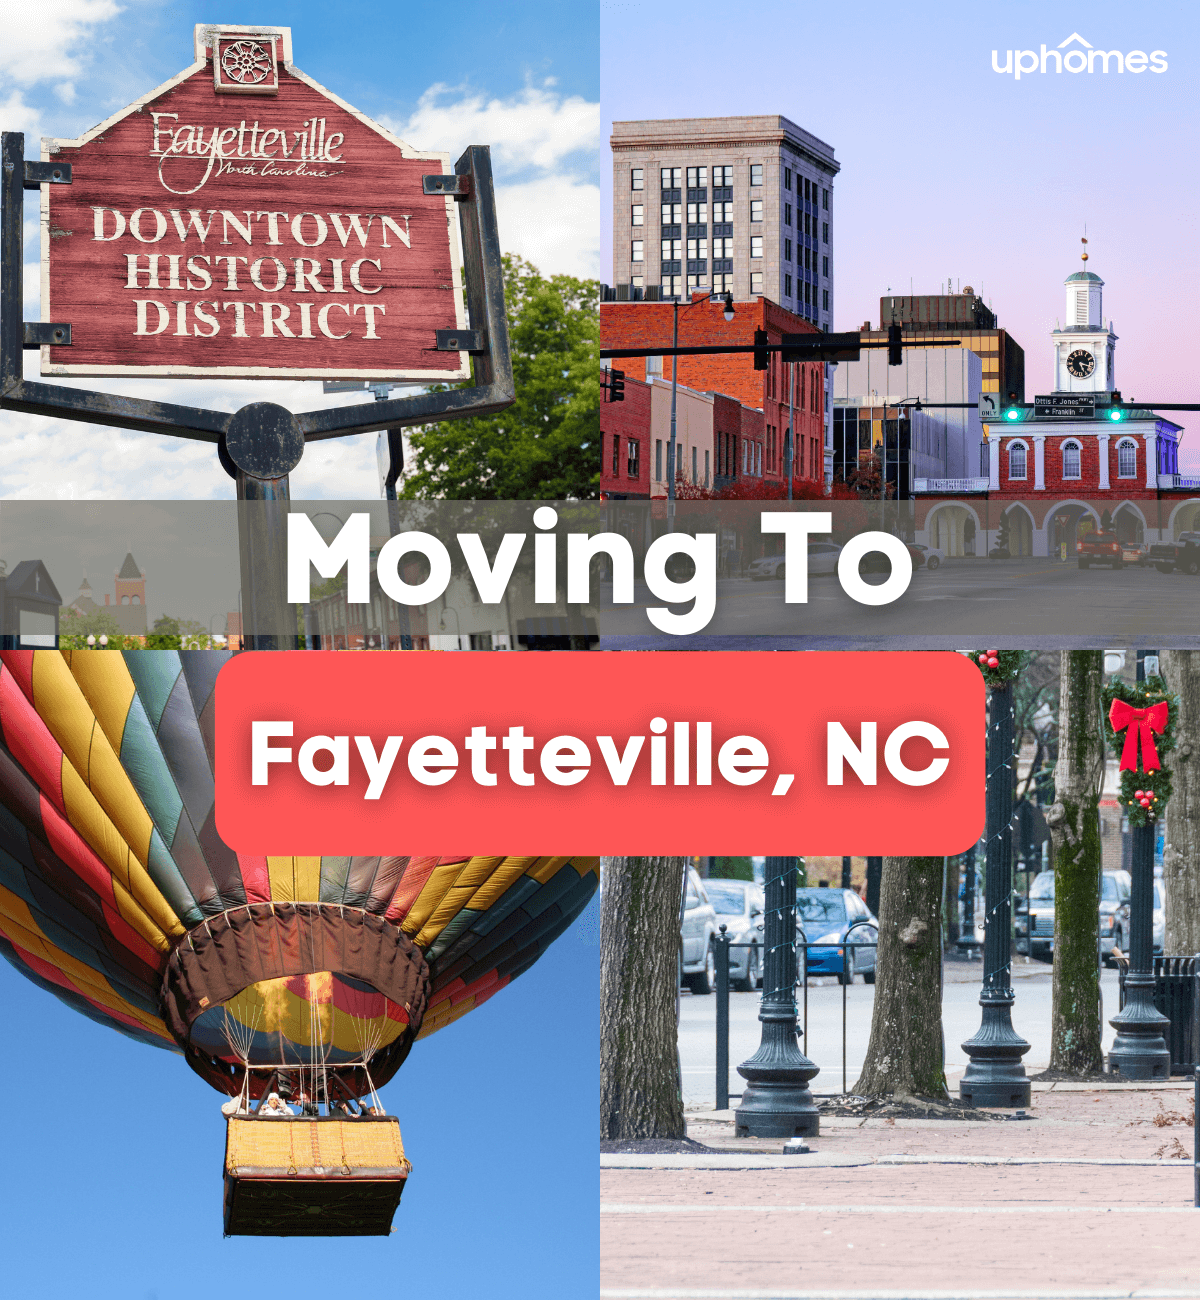 Moving to Fayetteville, NC - What is it like Living in Fayetteville, NC?